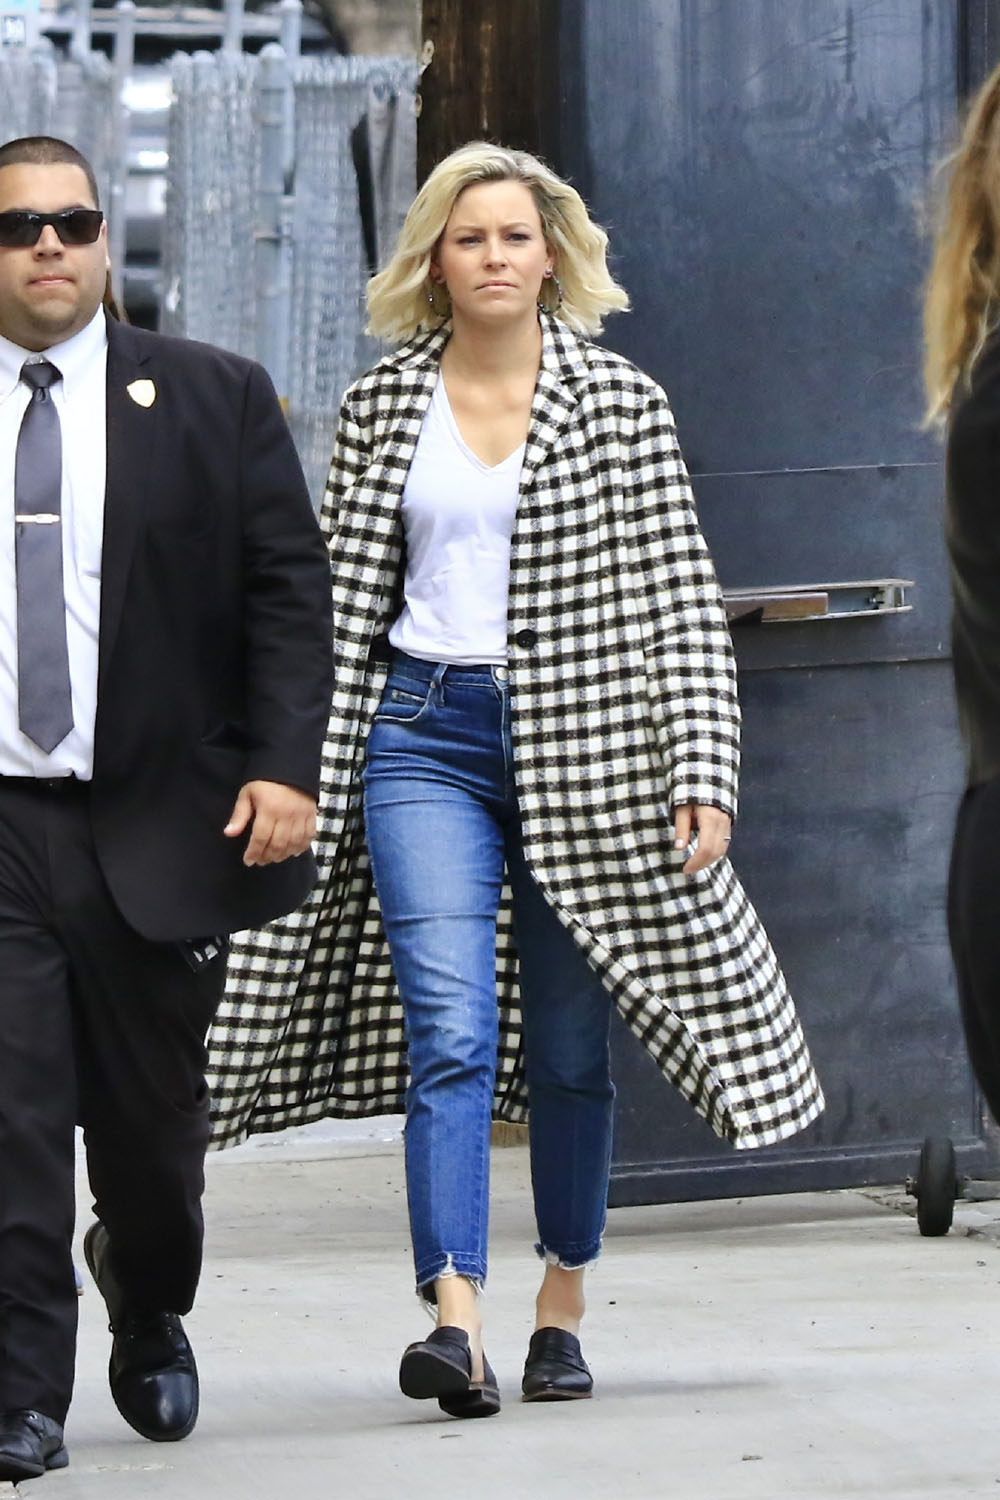 Elizabeth Banks arrives for an appearance on Jimmy Kimmel Live! wearing a long black and white checked coat